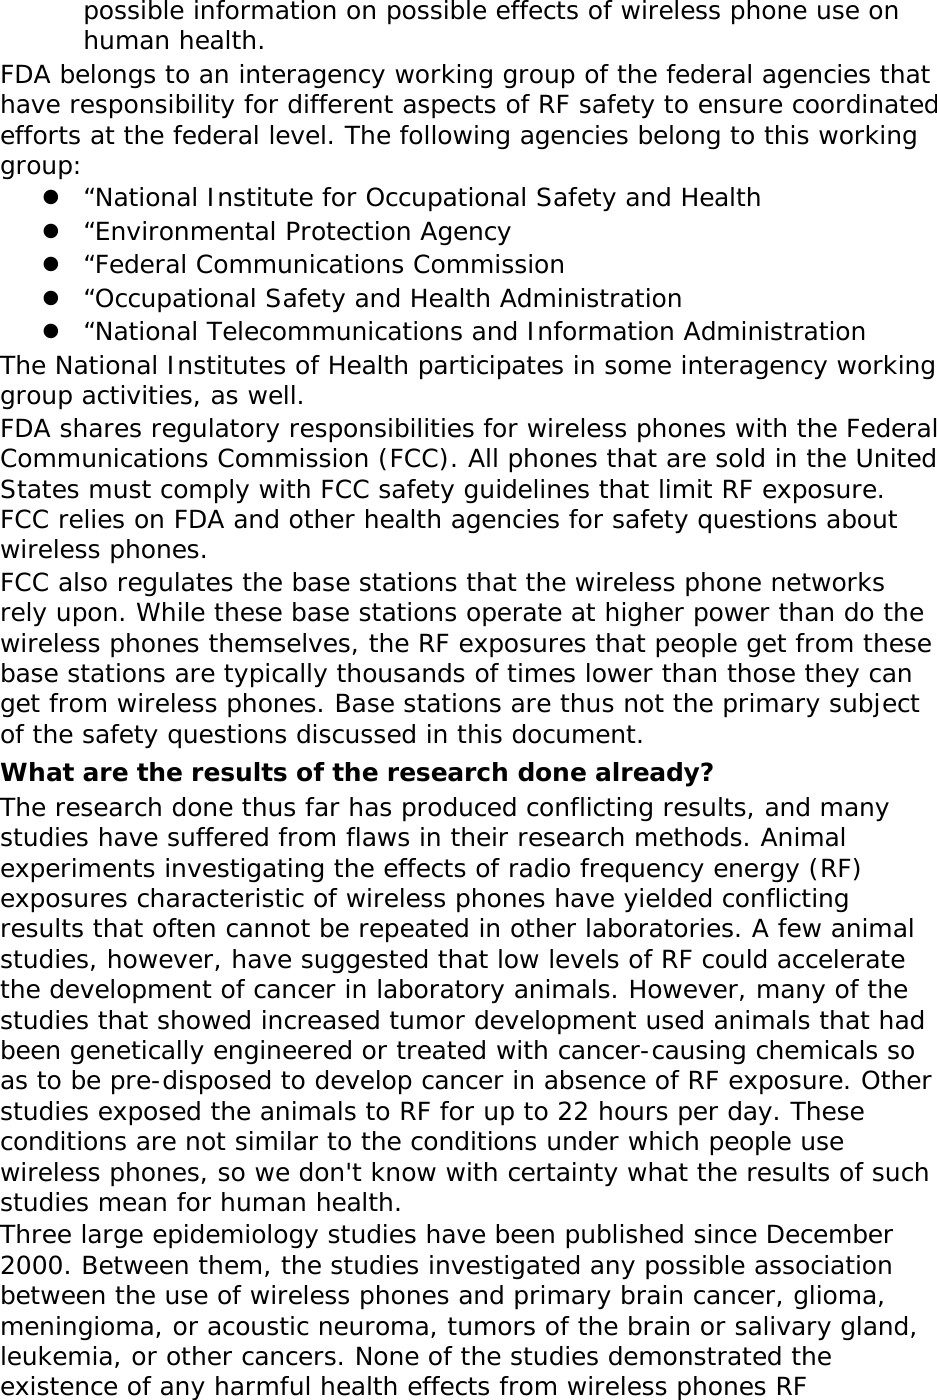 possible information on possible effects of wireless phone use on human health. FDA belongs to an interagency working group of the federal agencies that have responsibility for different aspects of RF safety to ensure coordinated efforts at the federal level. The following agencies belong to this working group: z “National Institute for Occupational Safety and Health z “Environmental Protection Agency z “Federal Communications Commission z “Occupational Safety and Health Administration z “National Telecommunications and Information Administration The National Institutes of Health participates in some interagency working group activities, as well. FDA shares regulatory responsibilities for wireless phones with the Federal Communications Commission (FCC). All phones that are sold in the United States must comply with FCC safety guidelines that limit RF exposure. FCC relies on FDA and other health agencies for safety questions about wireless phones. FCC also regulates the base stations that the wireless phone networks rely upon. While these base stations operate at higher power than do the wireless phones themselves, the RF exposures that people get from these base stations are typically thousands of times lower than those they can get from wireless phones. Base stations are thus not the primary subject of the safety questions discussed in this document. What are the results of the research done already? The research done thus far has produced conflicting results, and many studies have suffered from flaws in their research methods. Animal experiments investigating the effects of radio frequency energy (RF) exposures characteristic of wireless phones have yielded conflicting results that often cannot be repeated in other laboratories. A few animal studies, however, have suggested that low levels of RF could accelerate the development of cancer in laboratory animals. However, many of the studies that showed increased tumor development used animals that had been genetically engineered or treated with cancer-causing chemicals so as to be pre-disposed to develop cancer in absence of RF exposure. Other studies exposed the animals to RF for up to 22 hours per day. These conditions are not similar to the conditions under which people use wireless phones, so we don&apos;t know with certainty what the results of such studies mean for human health. Three large epidemiology studies have been published since December 2000. Between them, the studies investigated any possible association between the use of wireless phones and primary brain cancer, glioma, meningioma, or acoustic neuroma, tumors of the brain or salivary gland, leukemia, or other cancers. None of the studies demonstrated the existence of any harmful health effects from wireless phones RF 